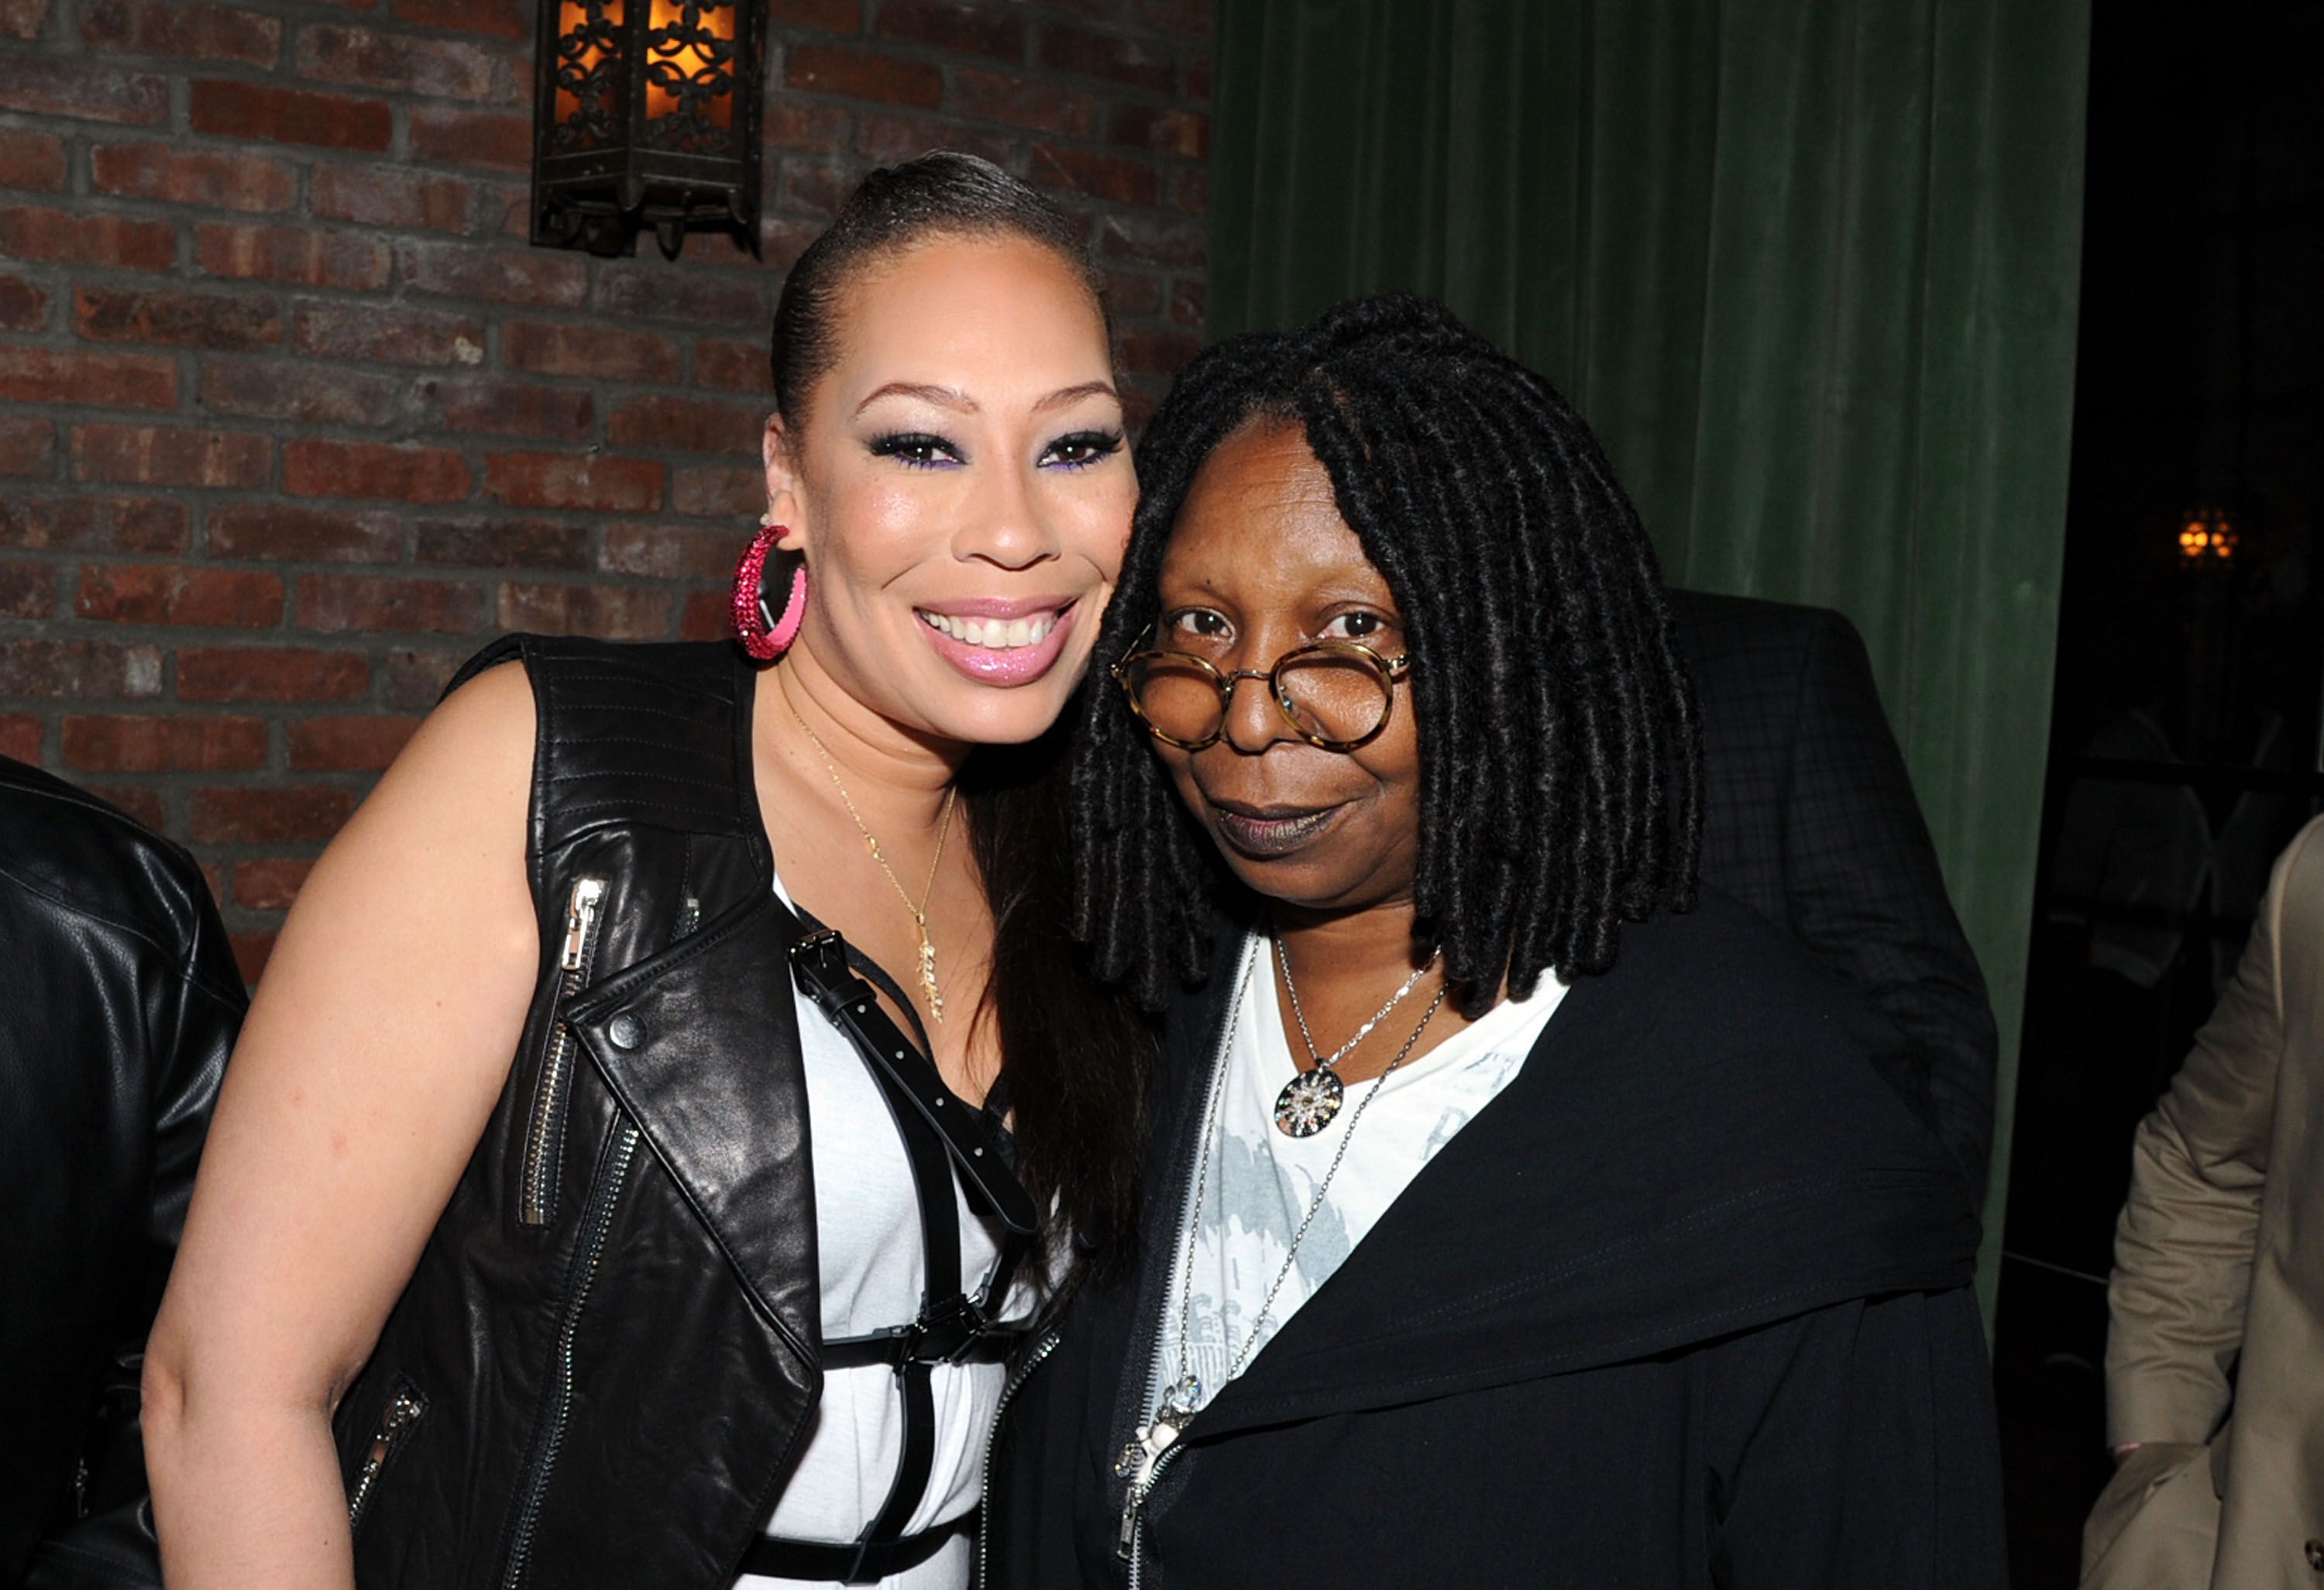 Alex Martin and Whoopi Goldberg during the former's "40 and Fly" birthday celebration at The Bowery Hotel on May 9, 2014 in New York City. | Source: Getty Images